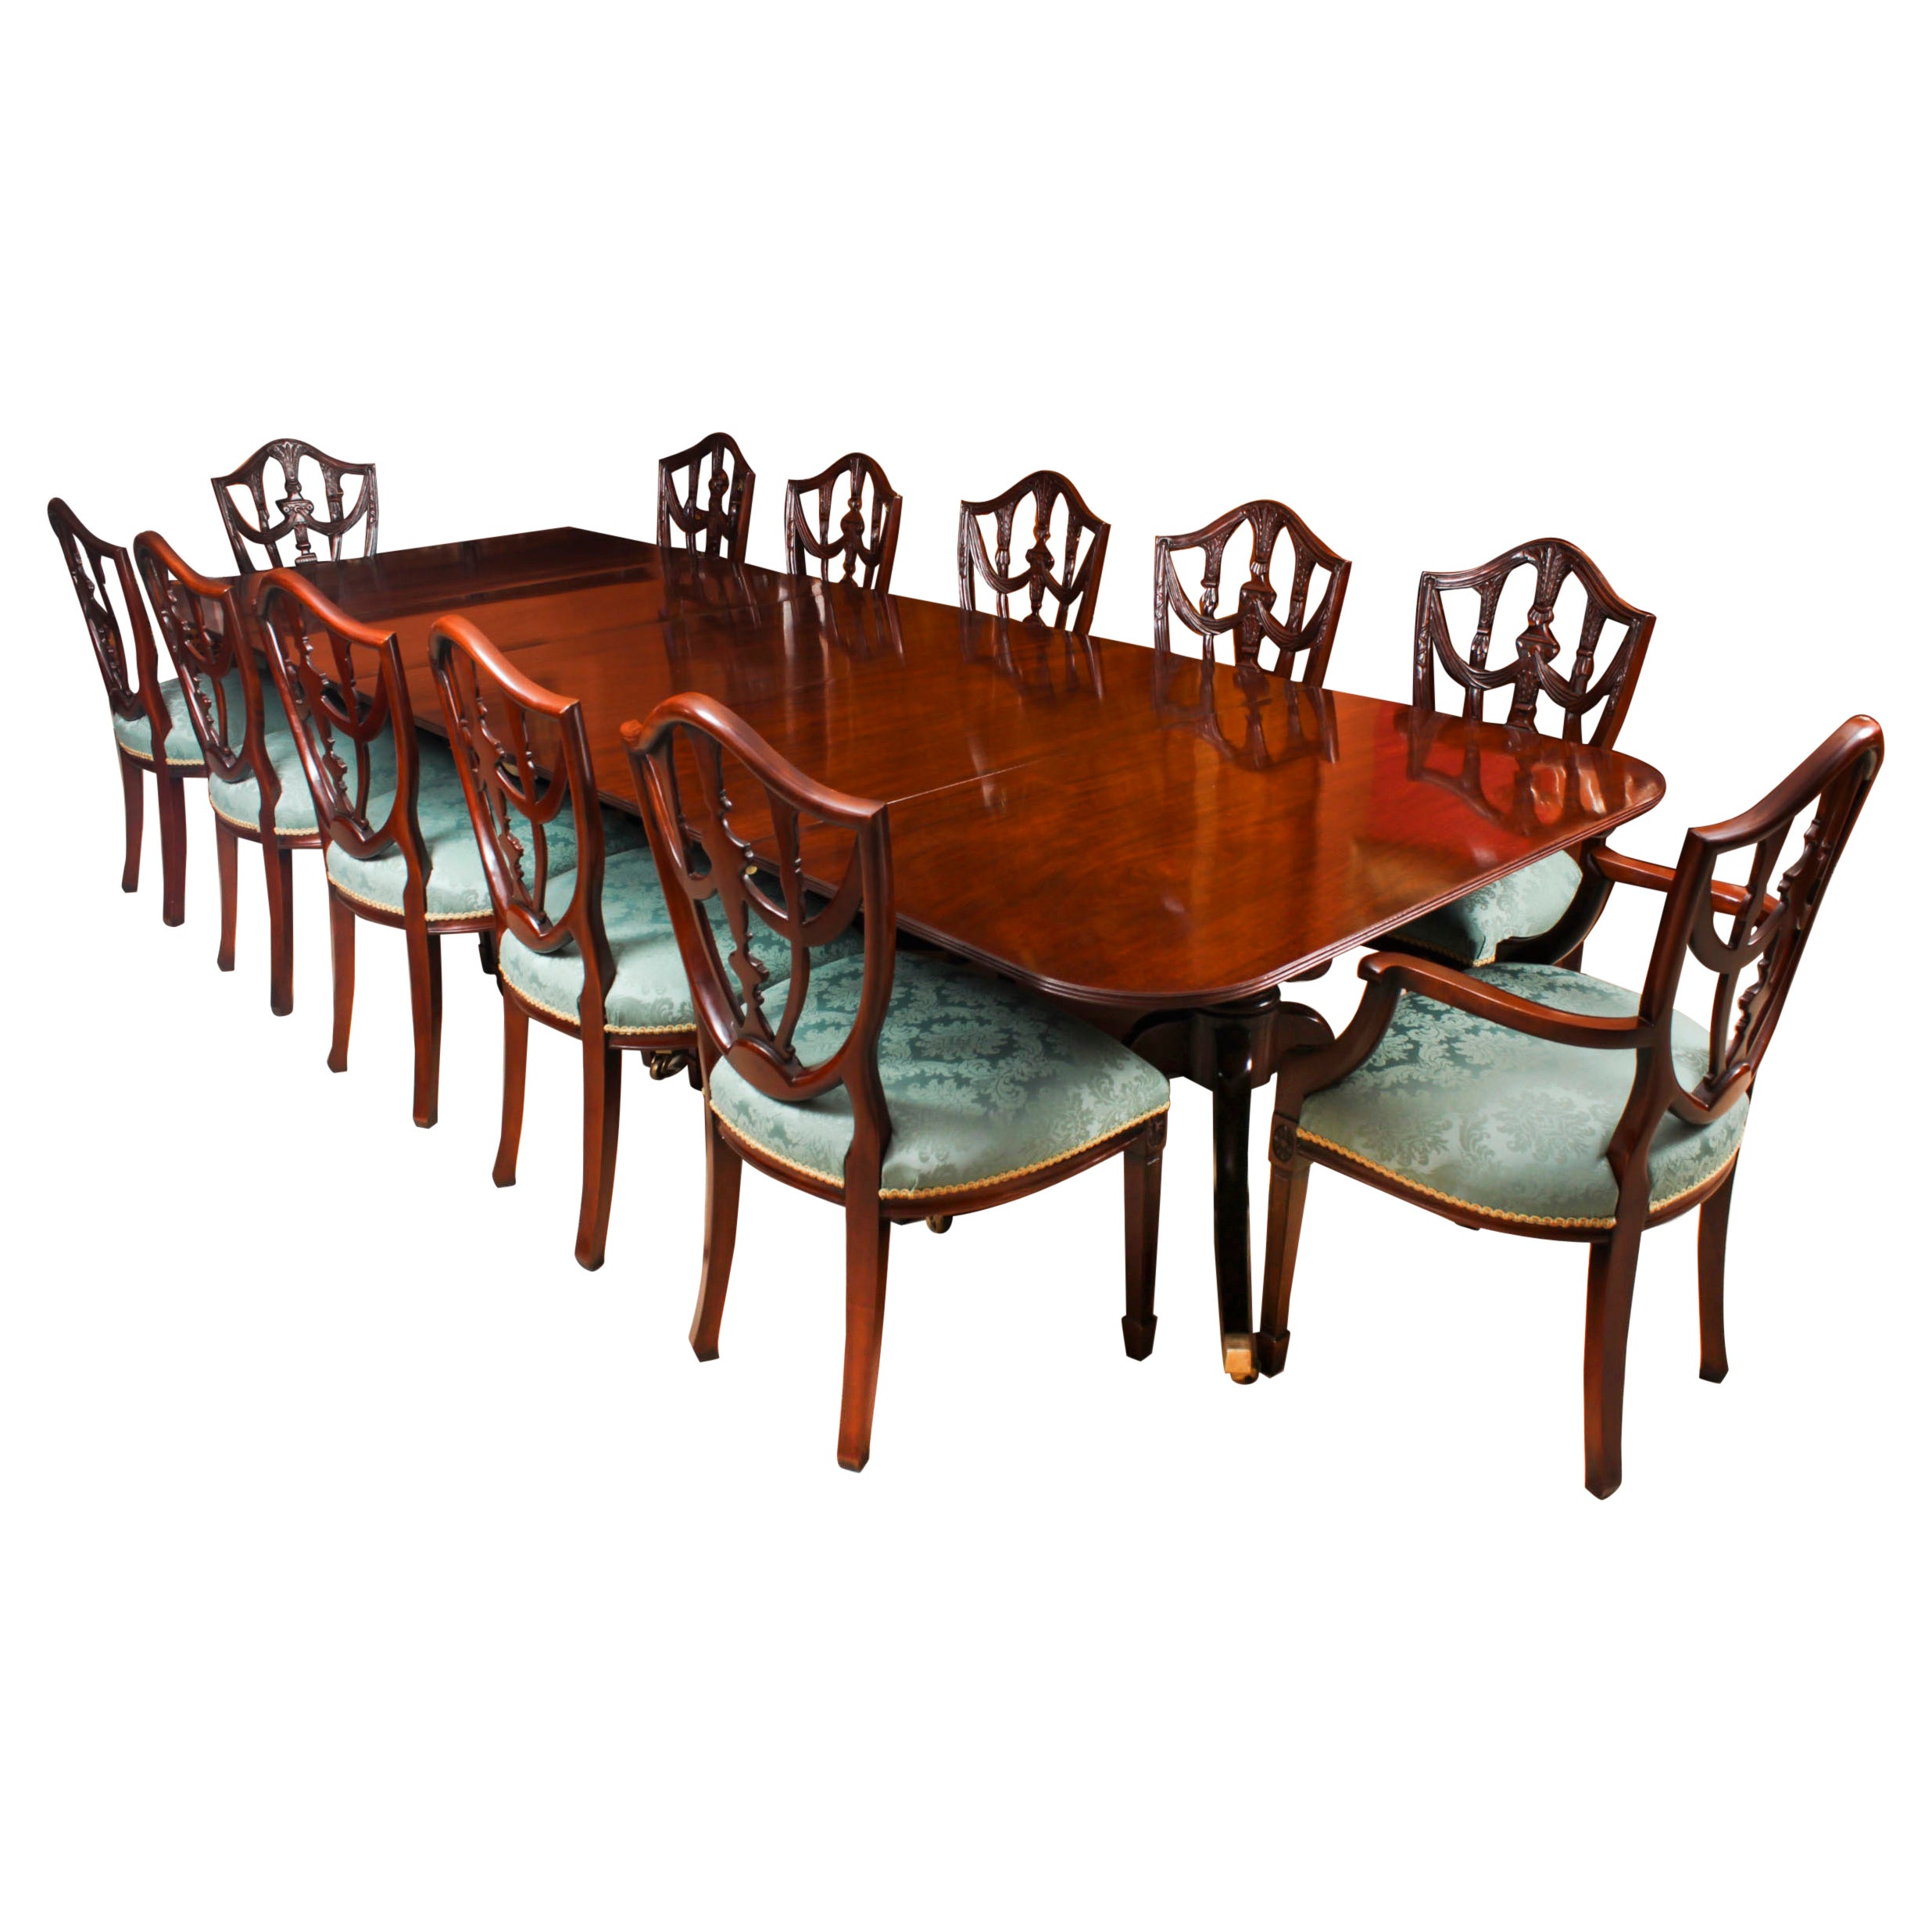 Antique12ft Regency Triple Pillar Dining Table C1830 19th C & 12 Chairs For Sale